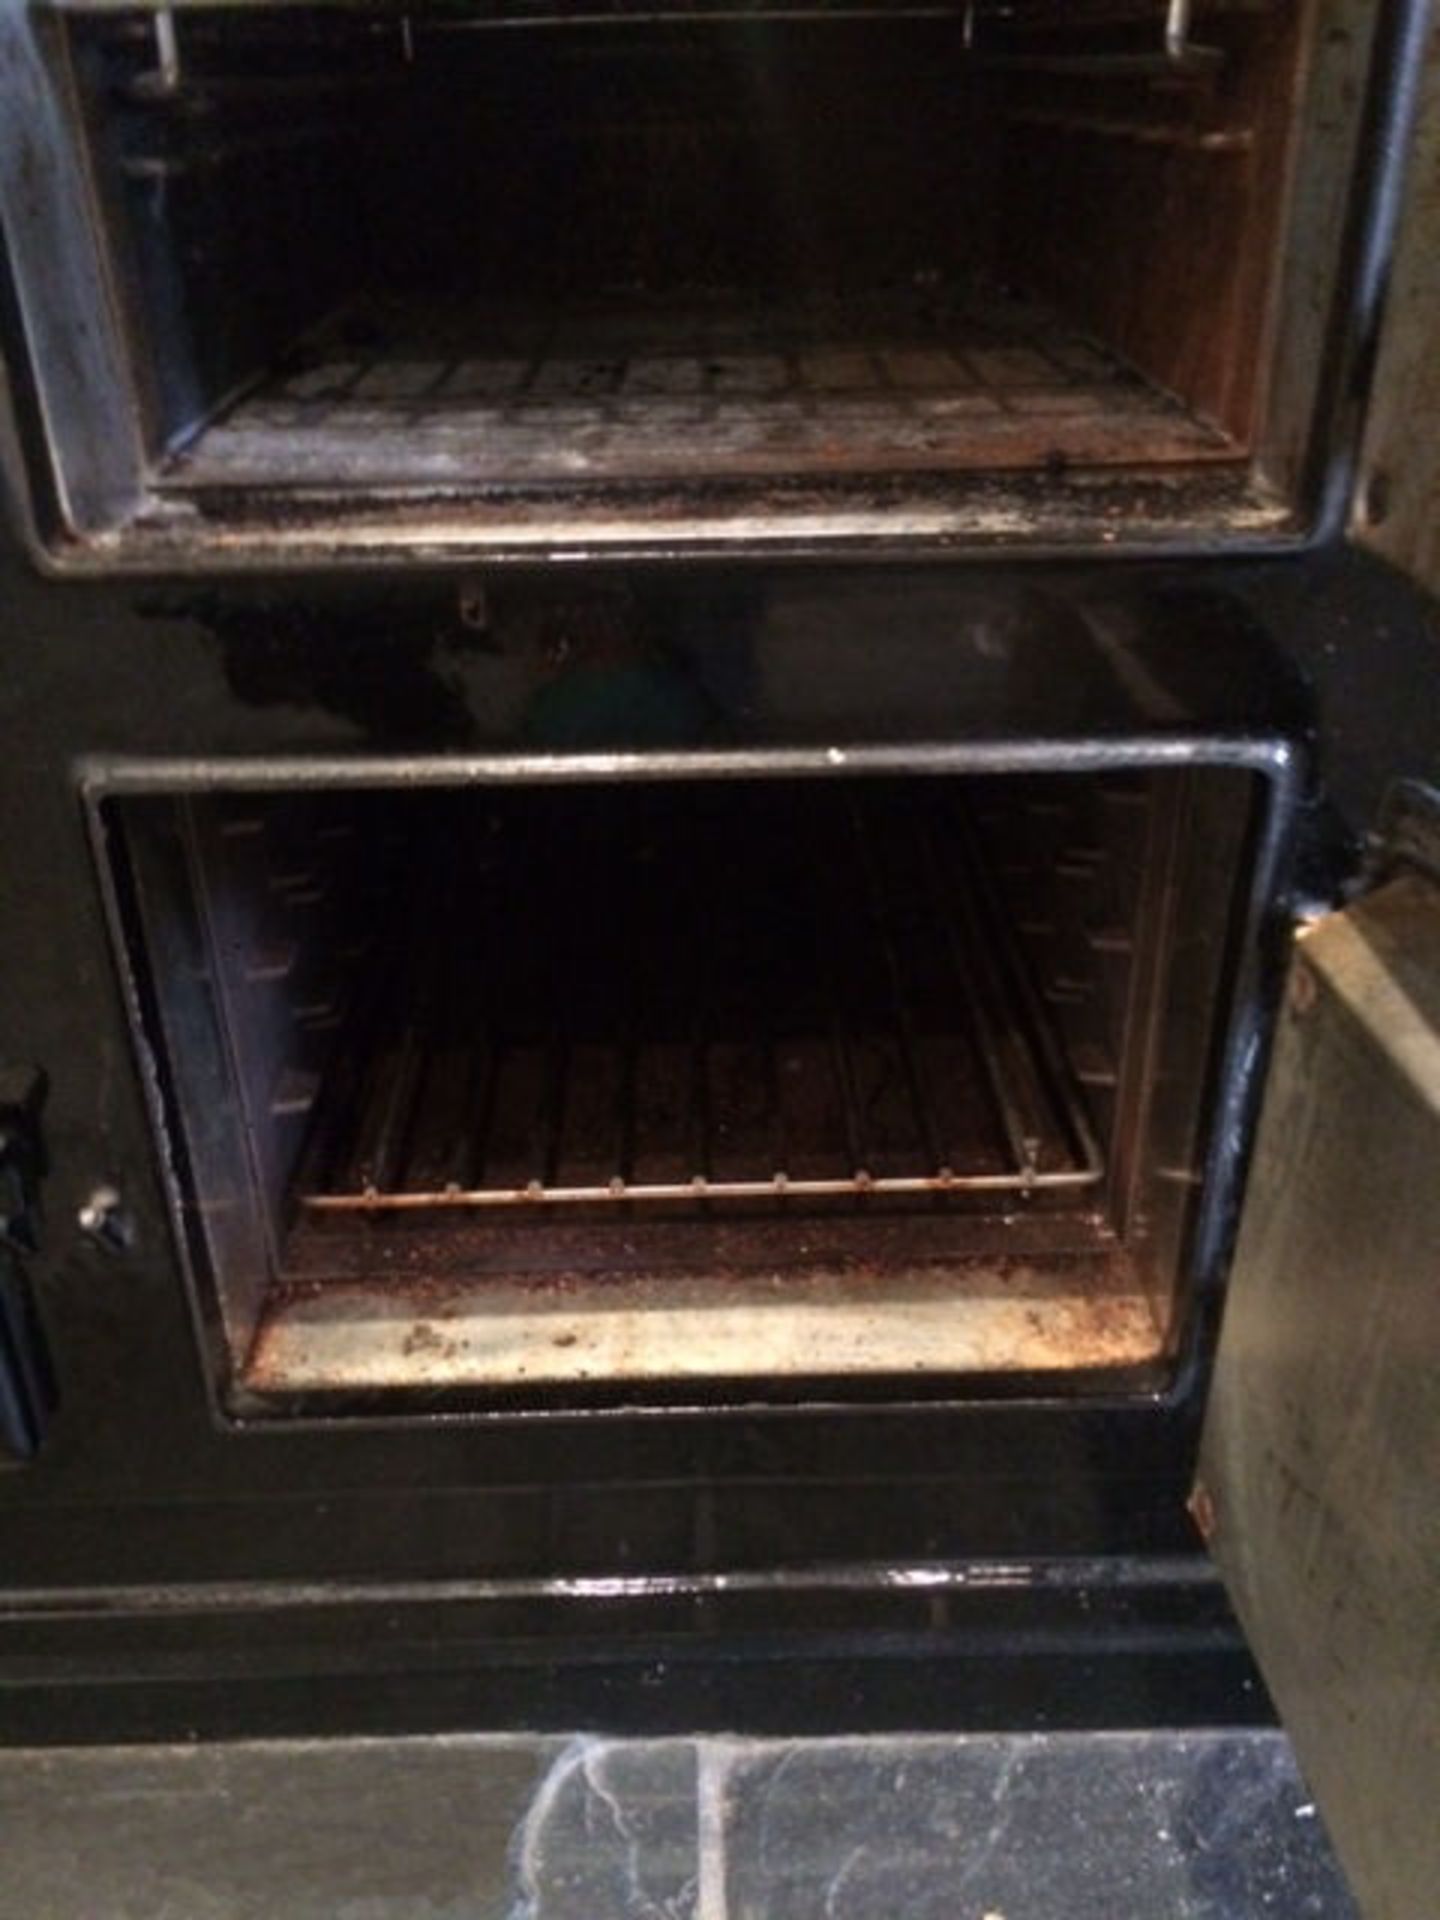 1 x Aga 2-Oven Gas Range Cooker - Cast Iron With Black Enamel Finish - Preowned - NO VAT - Image 5 of 10